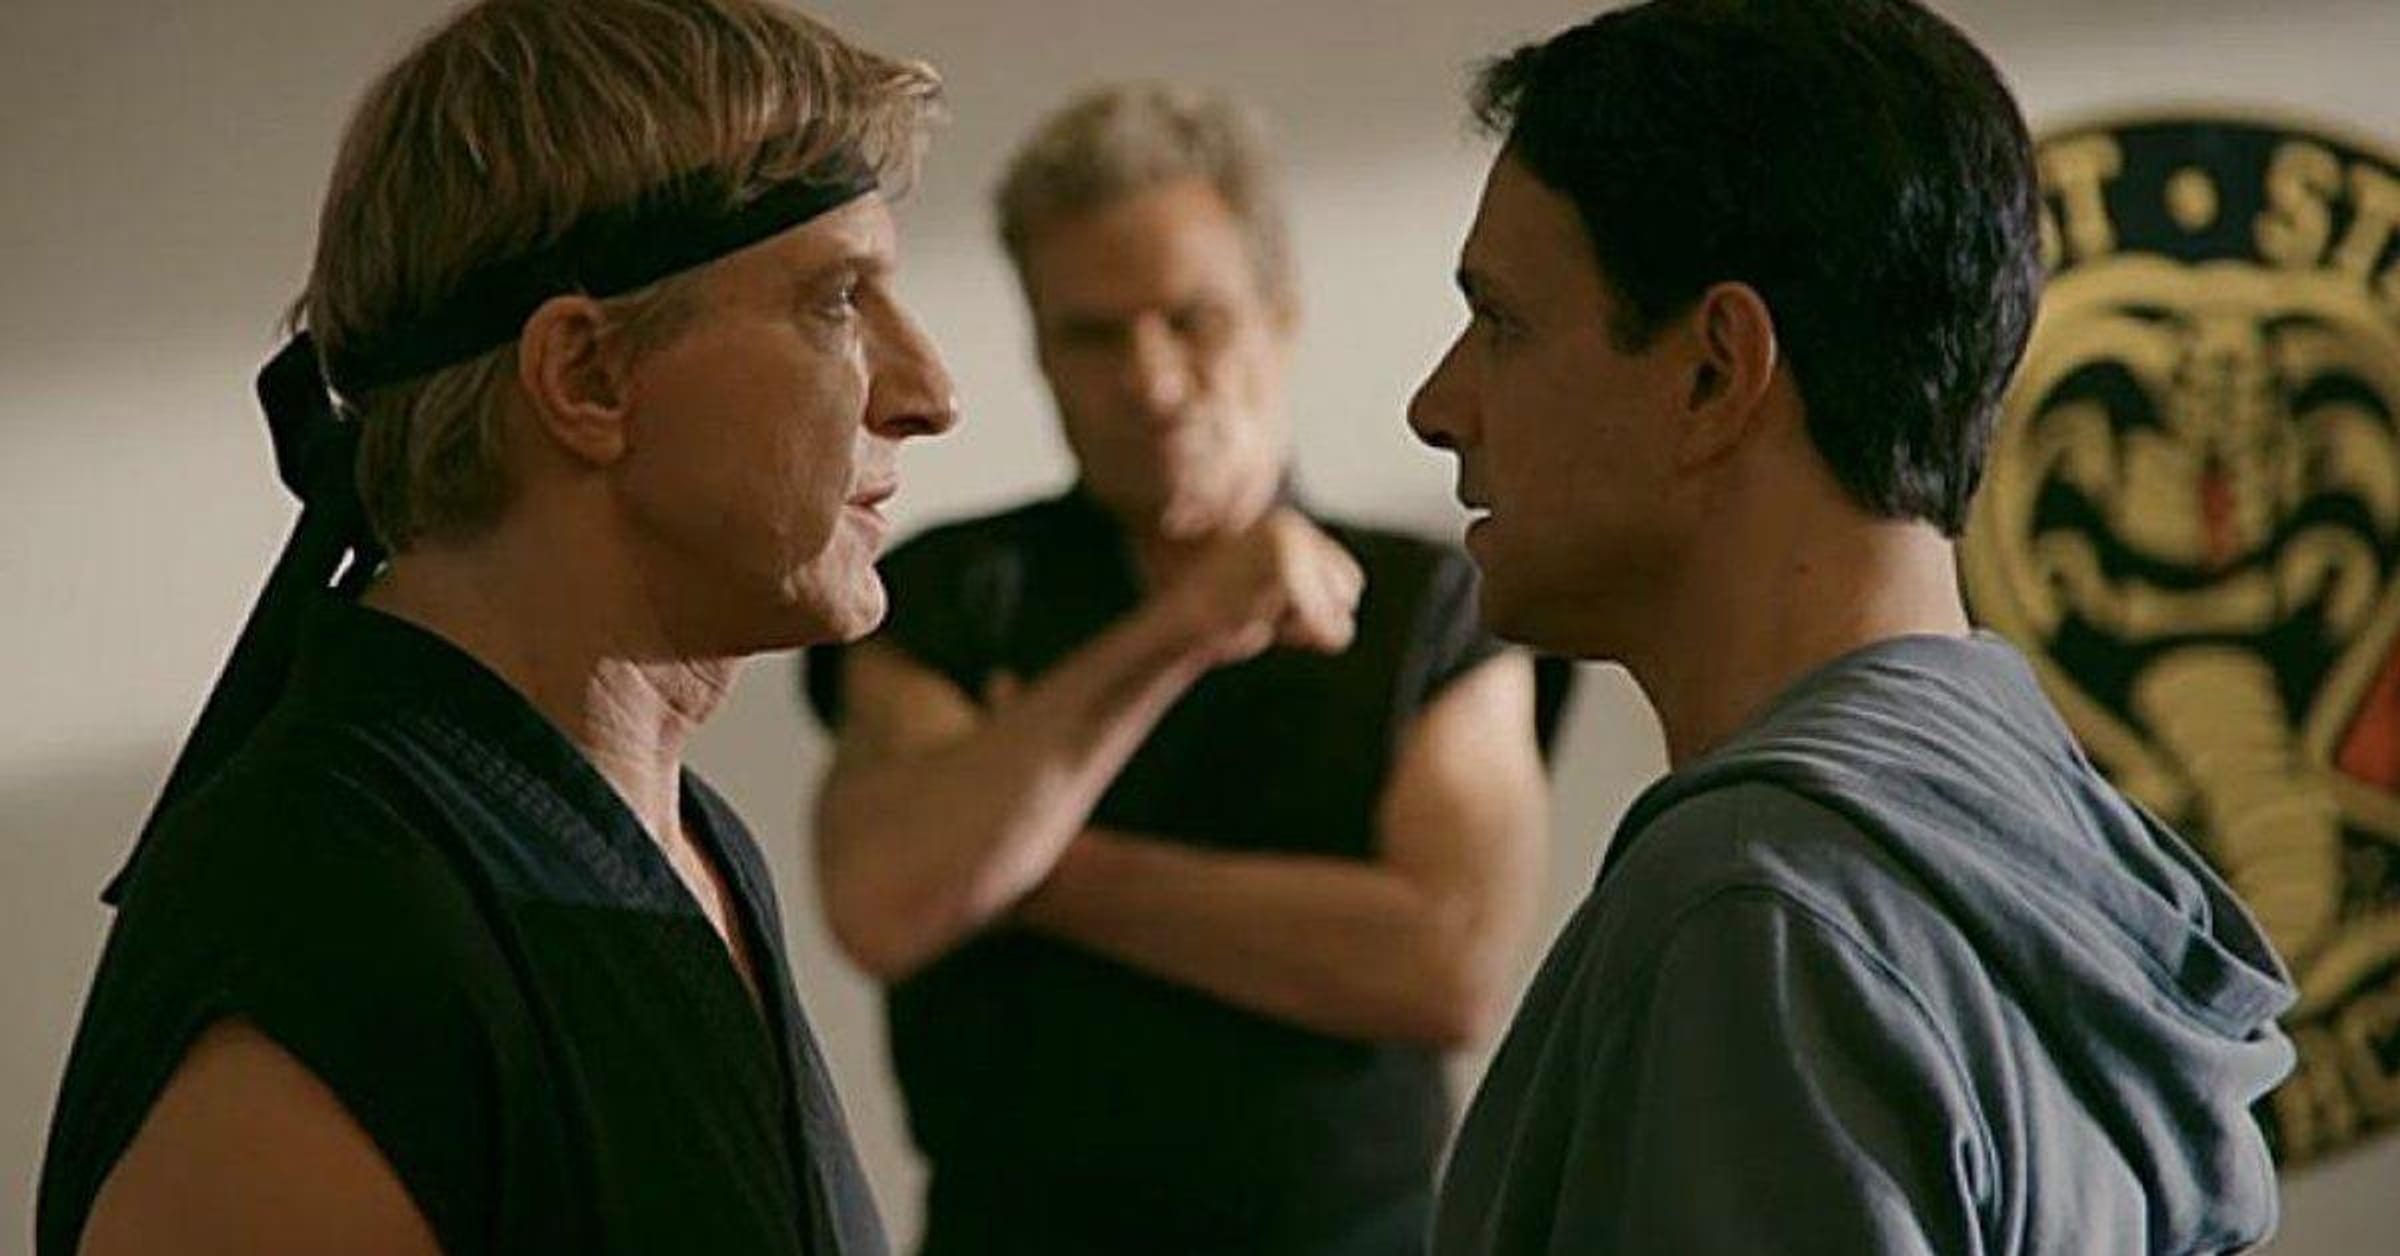 The Best Characters From 's 'Cobra Kai', Ranked